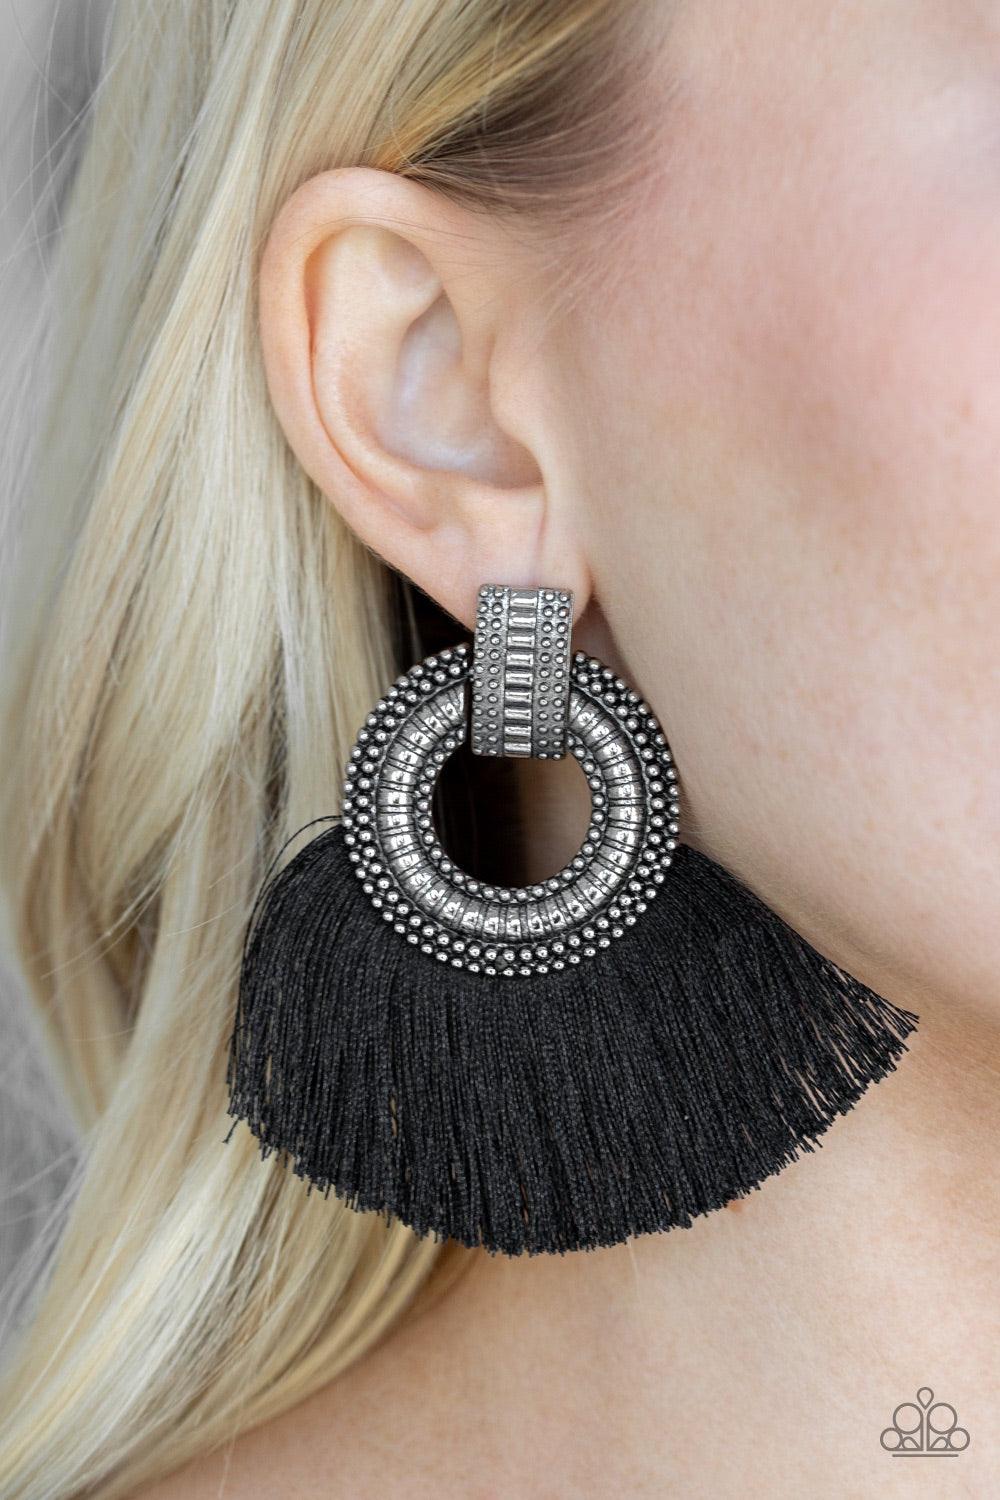 Paparazzi Accessories I Am Spartacus - Black A plume of shiny black thread flares out from the bottom of an ornate silver fitting, creating a fierce fringe. Earring attaches to a standard post fitting. Jewelry